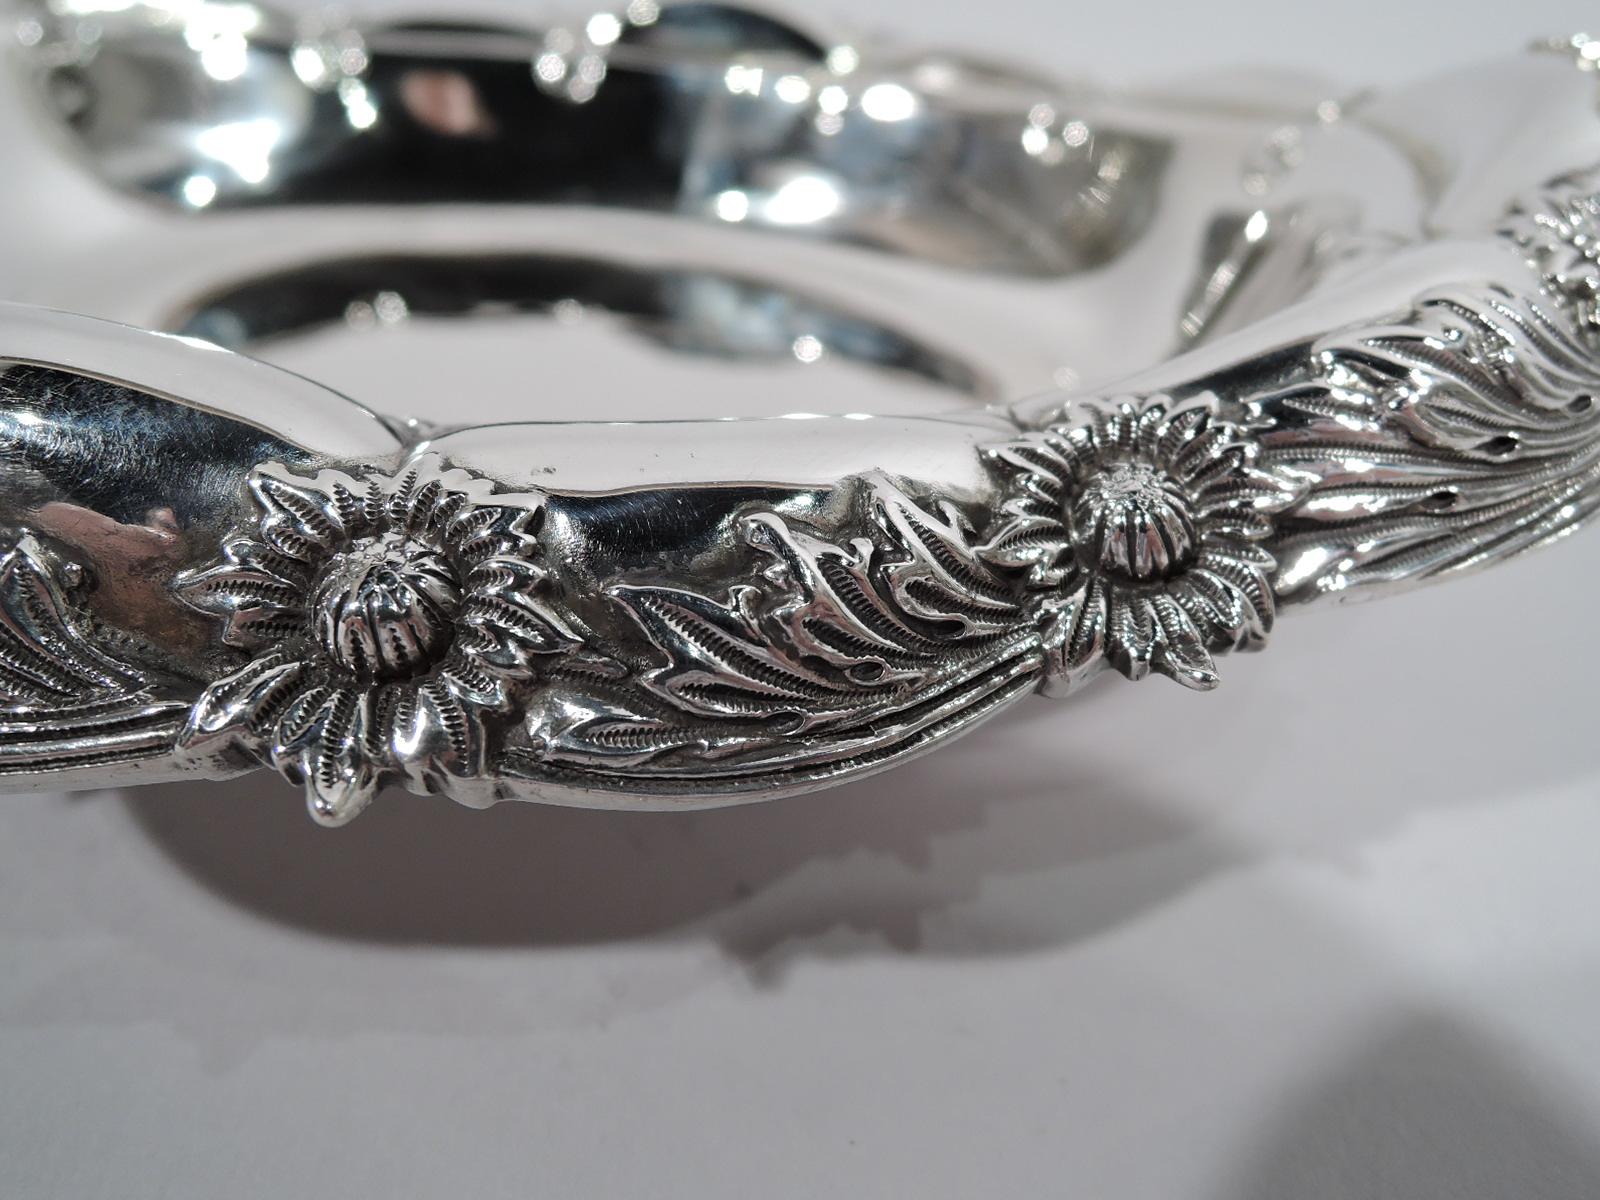 American Pair of Tiffany Chrysanthemum Japonesque Sterling Silver Serving Bowls